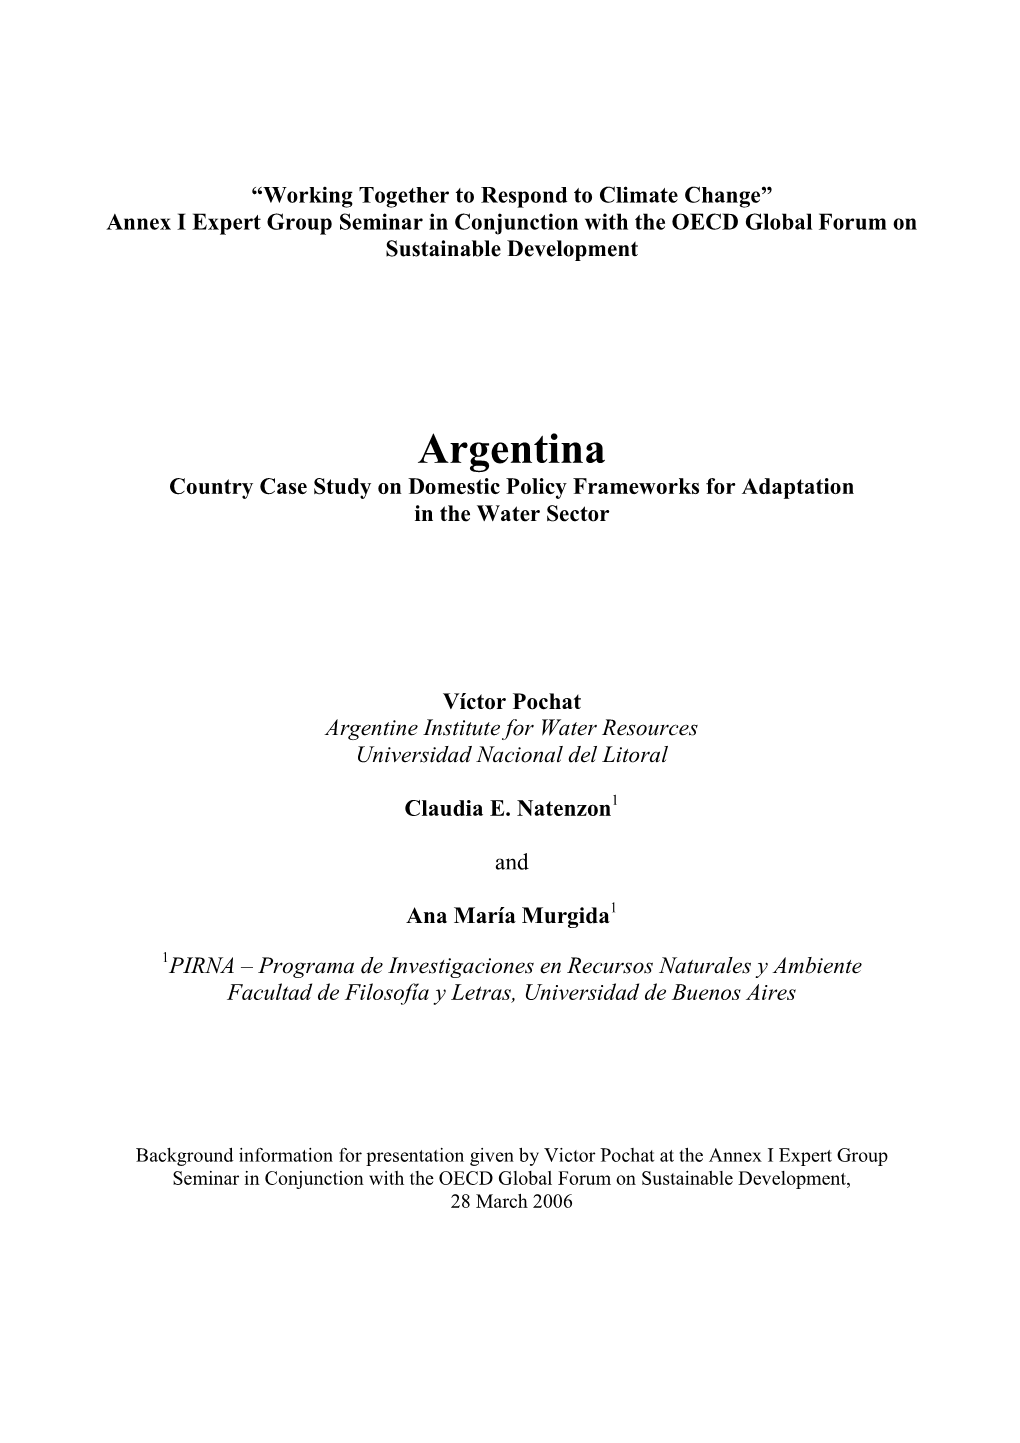 Argentina Country Case Study on Domestic Policy Frameworks for Adaptation in the Water Sector